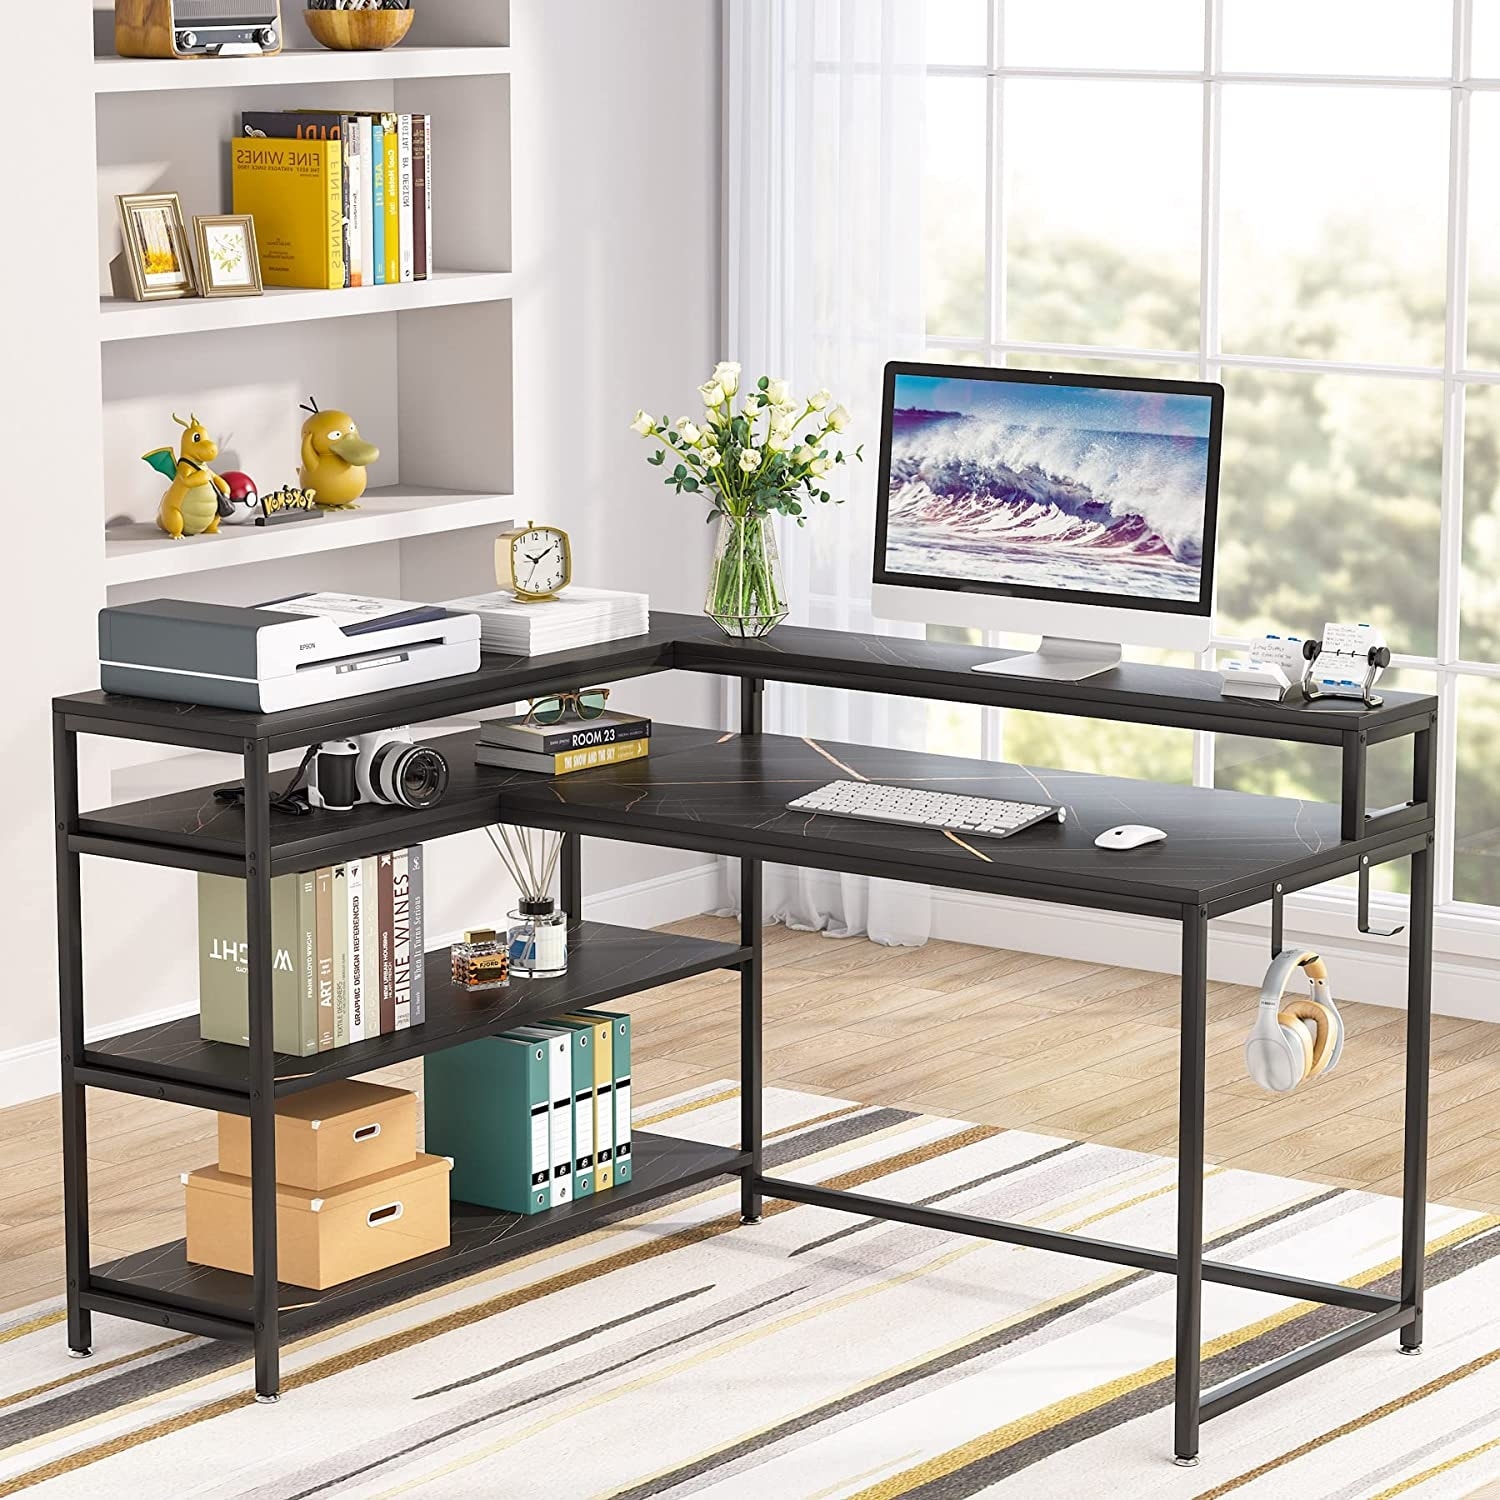 https://ak1.ostkcdn.com/images/products/is/images/direct/461506d0d245a20e662231a746e19cea628eb996/Reversible-L-Shaped-Computer-Desk-with-Storage-Shelf-and-Monitor-Stand.jpg